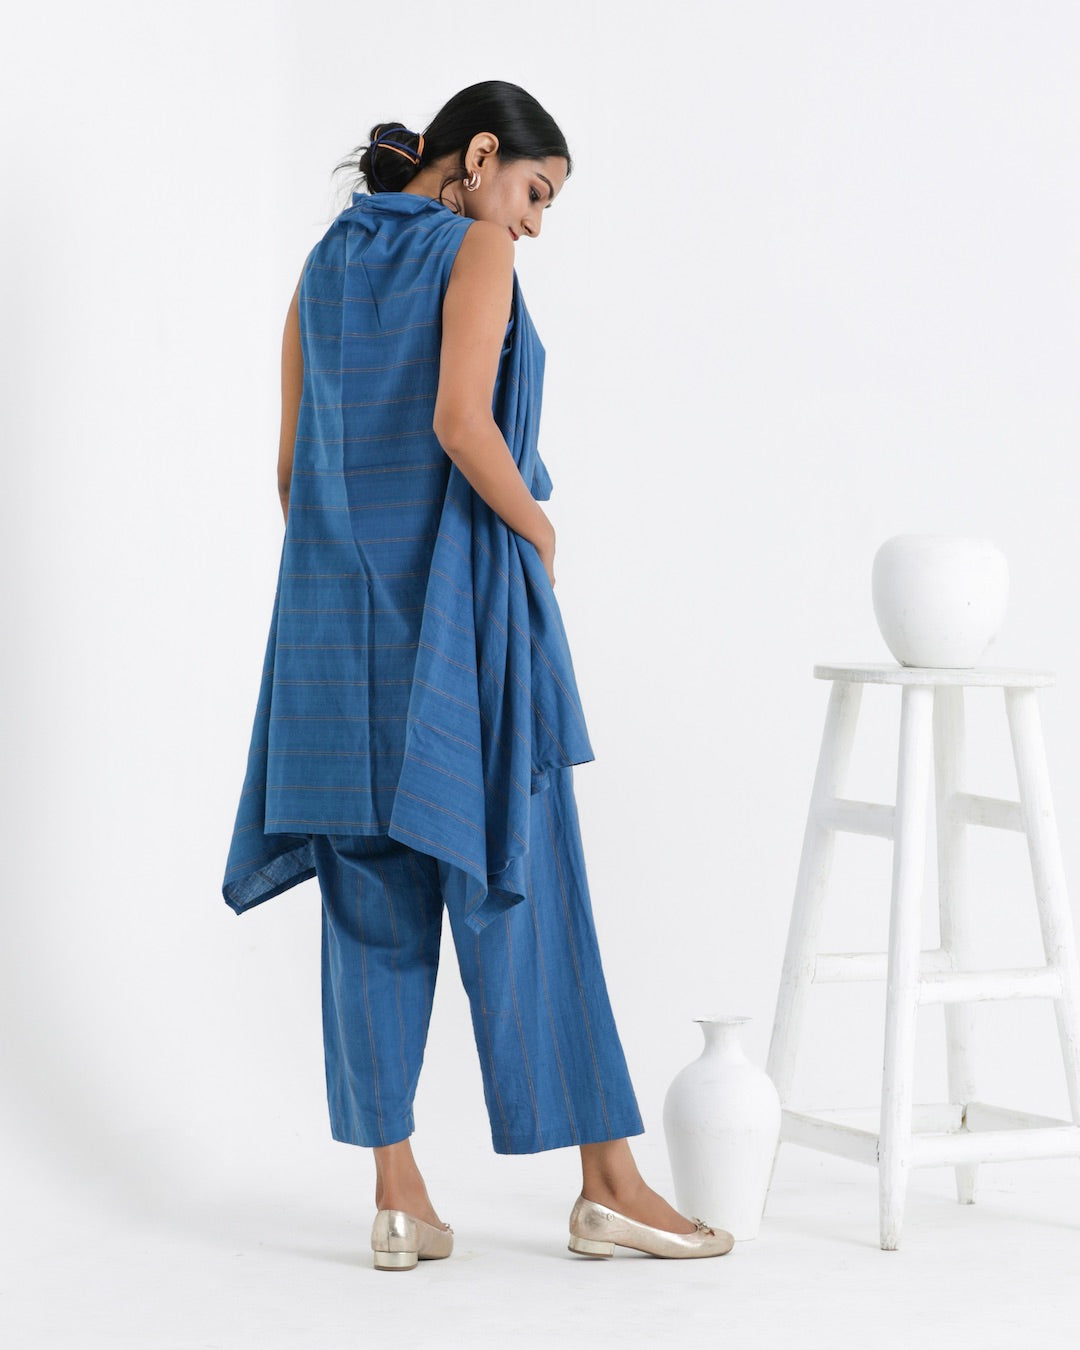 hop Shrug co-ords from Bebaak: Vacation wear and loungewear